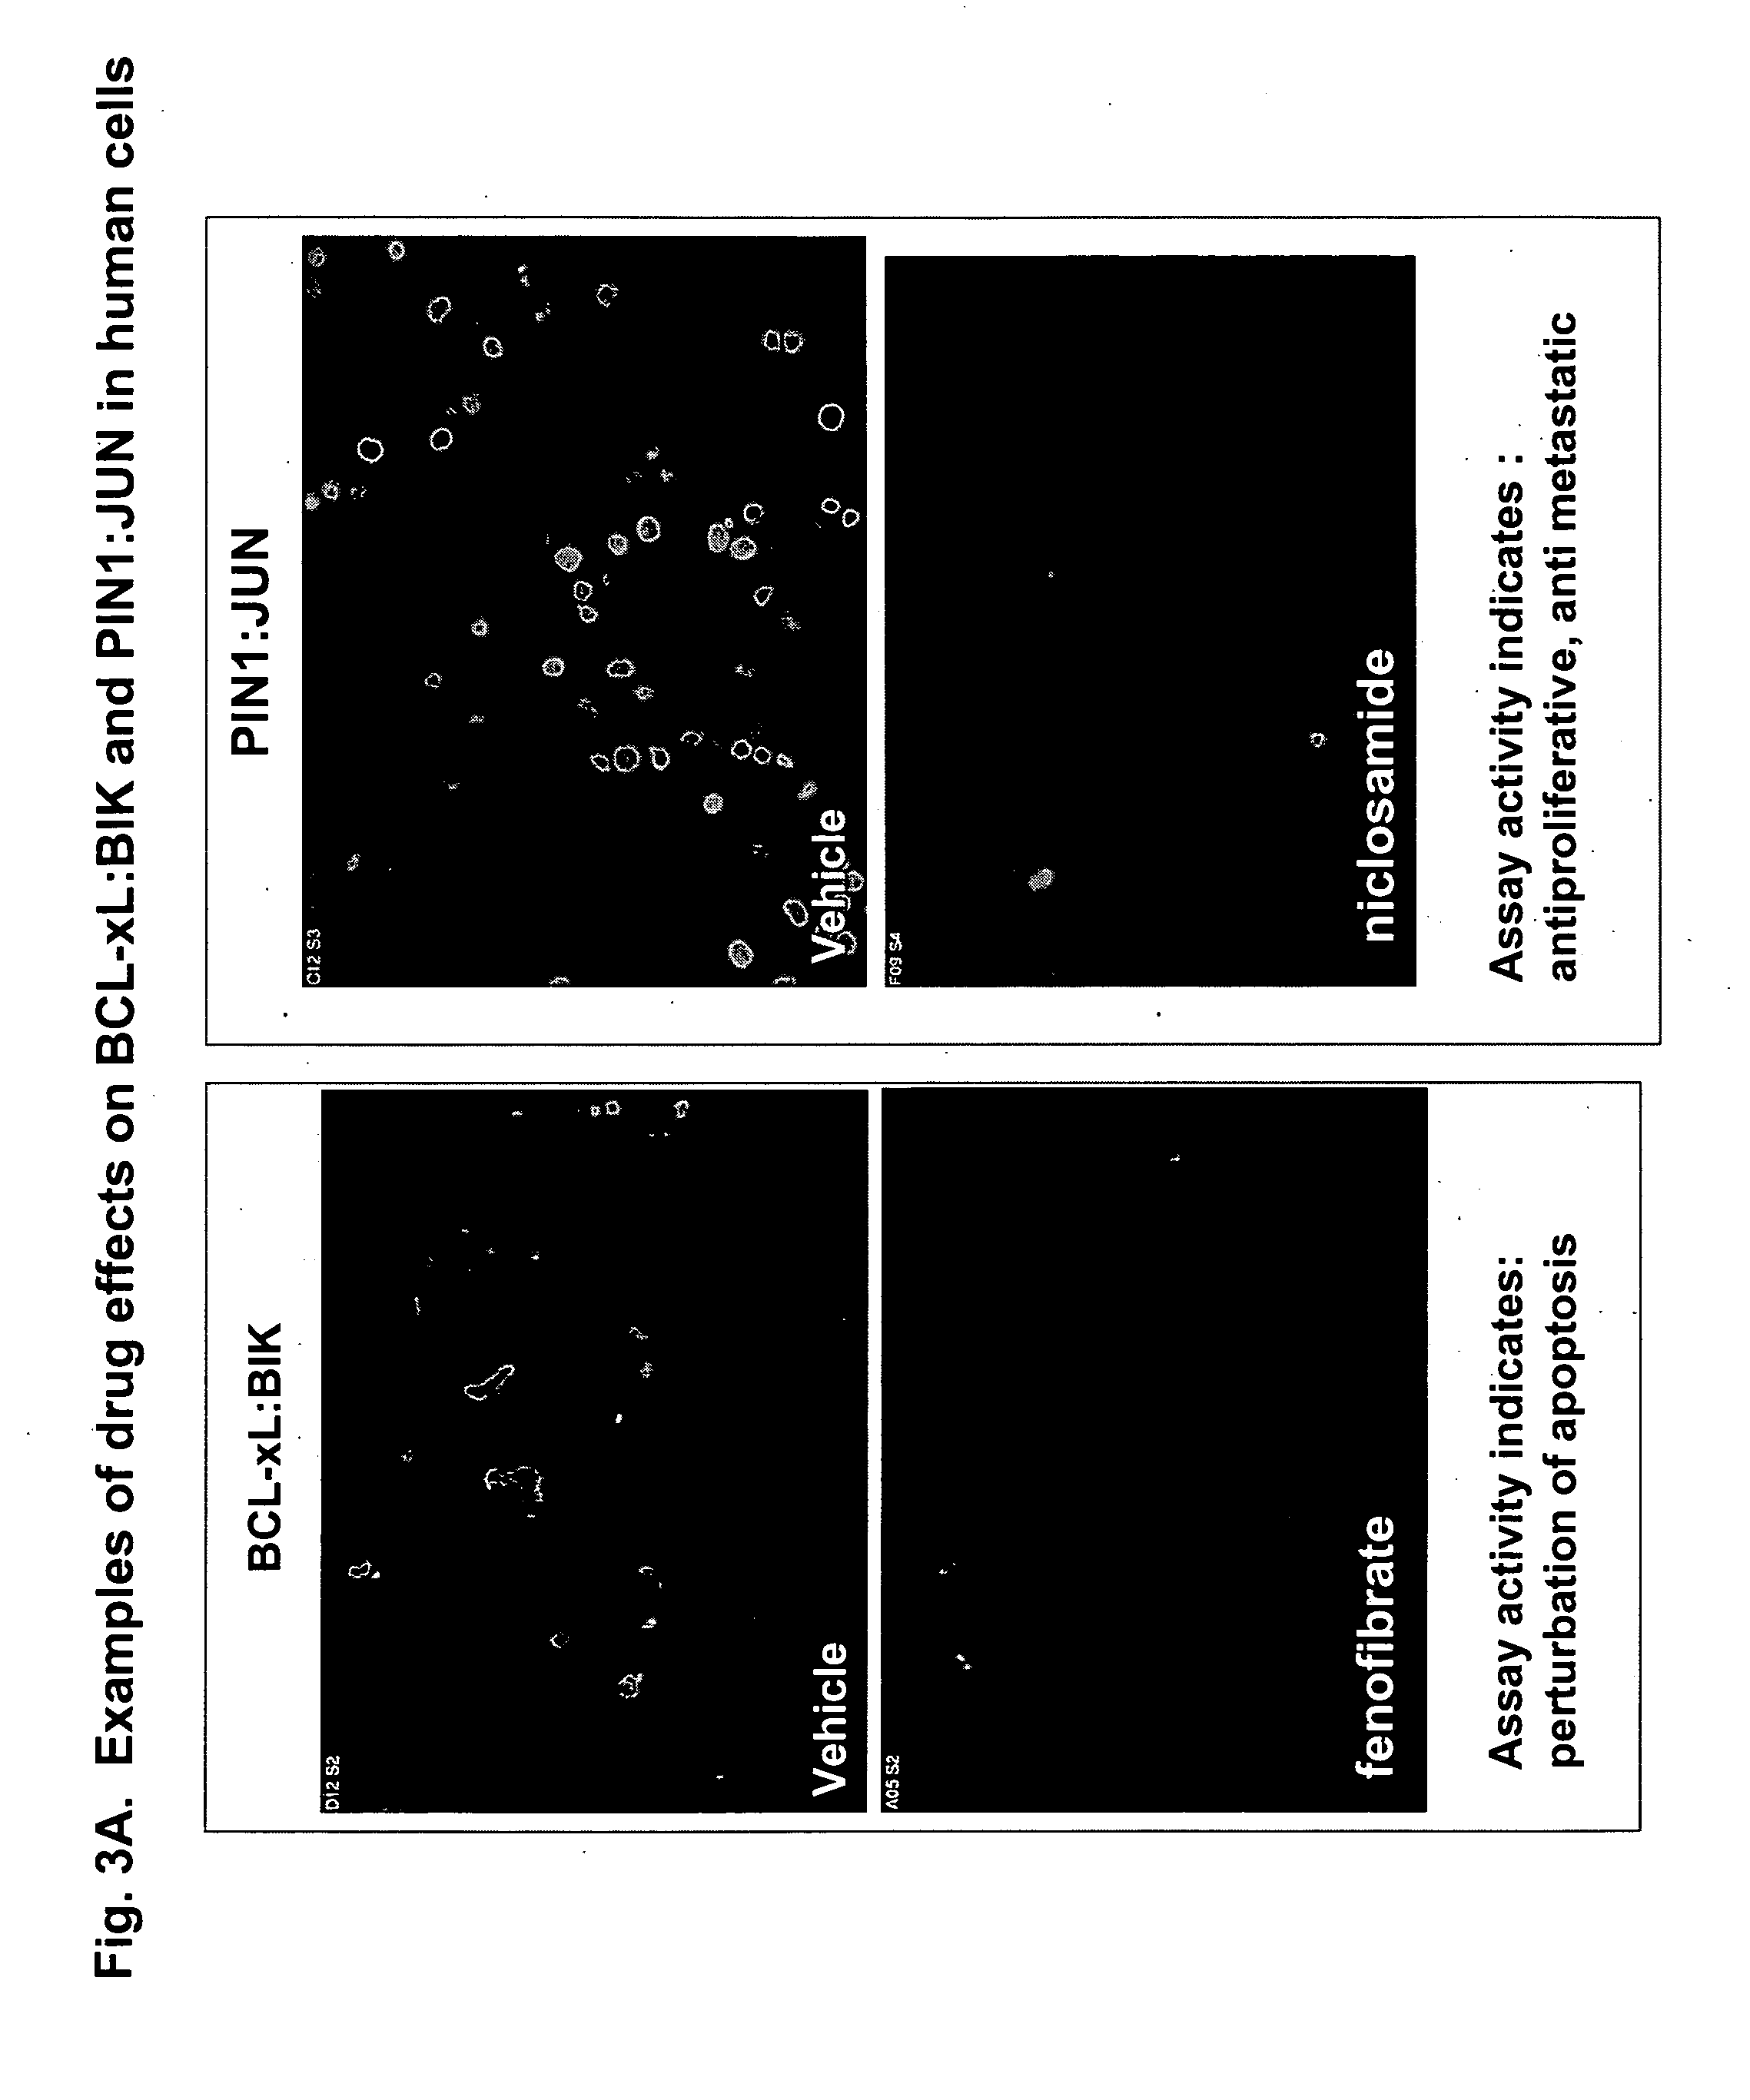 Methods for identifying new drug leads and new therapeutic uses for known drugs